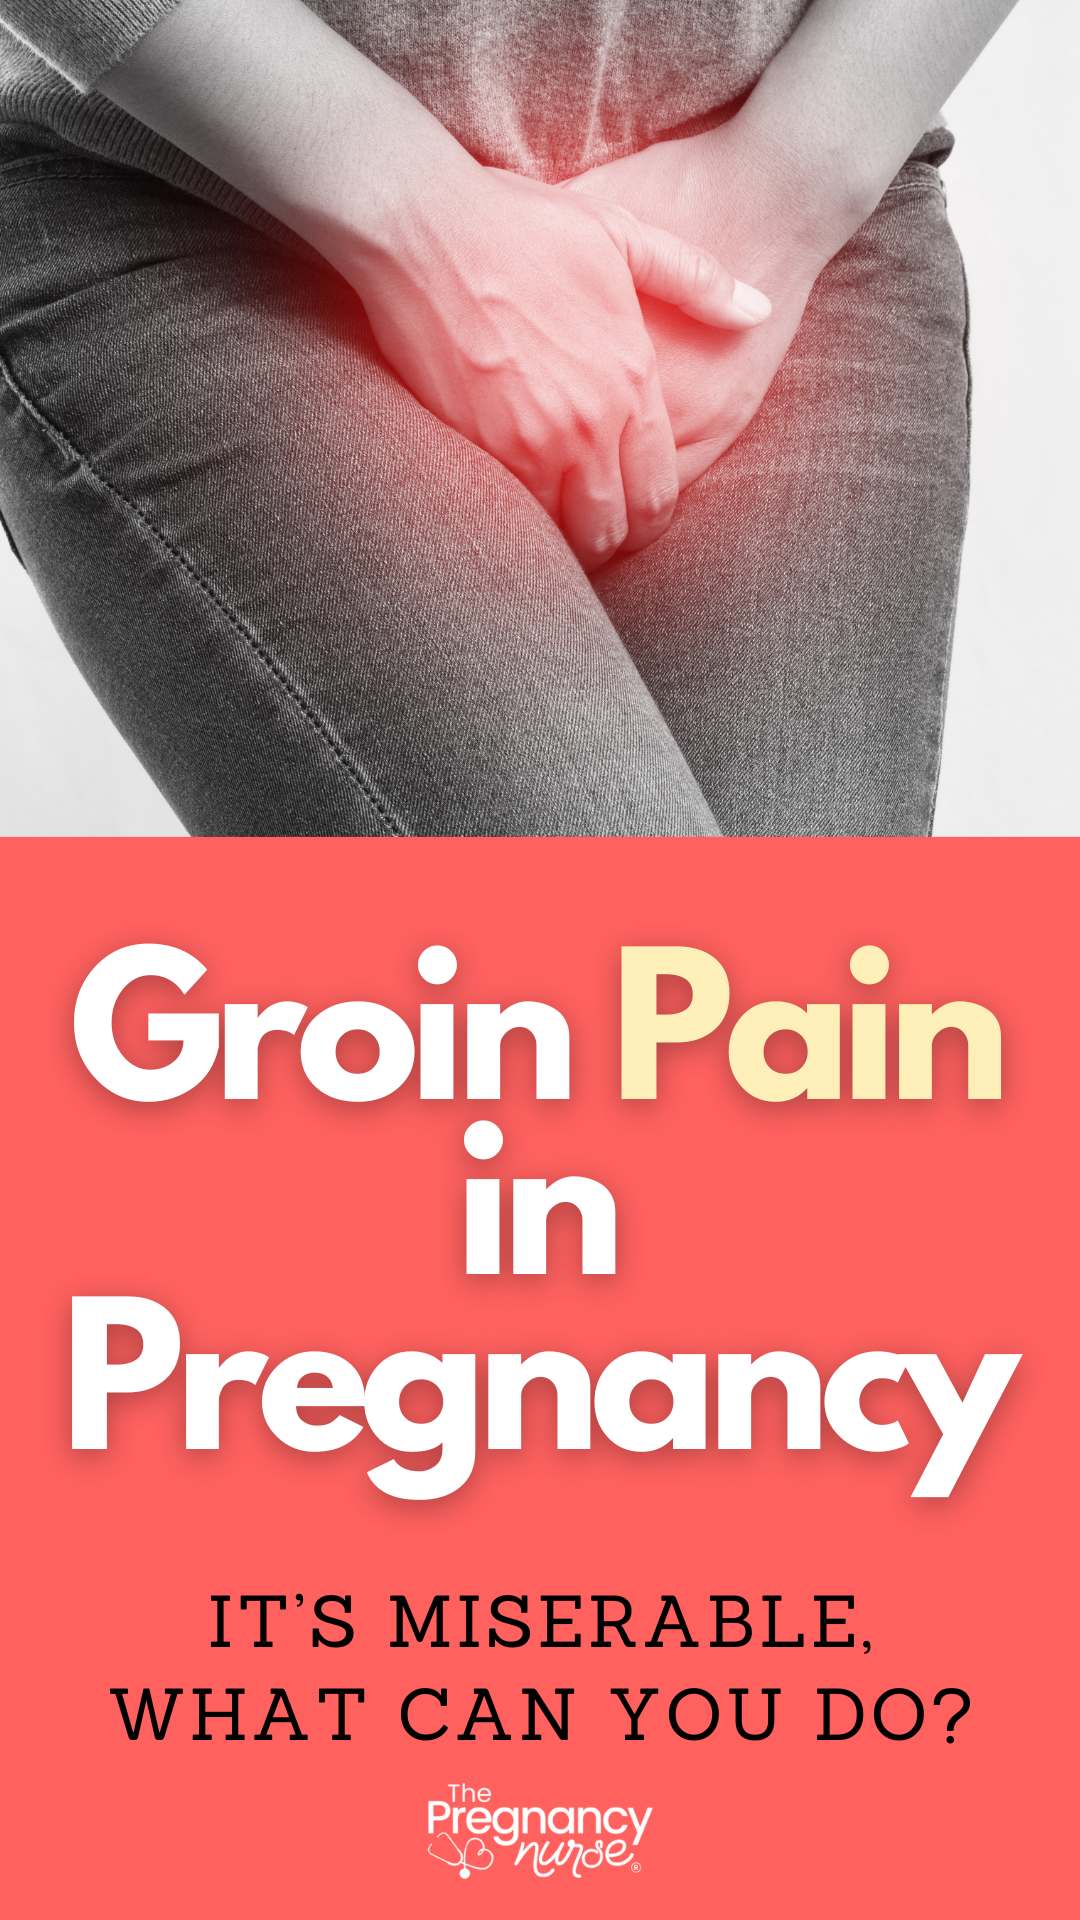 Are you experiencing groin, inner thigh, or pelvic pain during pregnancy? You're not alone. Discover what's considered normal and when to seek medical attention. Don't just accept this as part of pregnancy, there ARE things you can do.